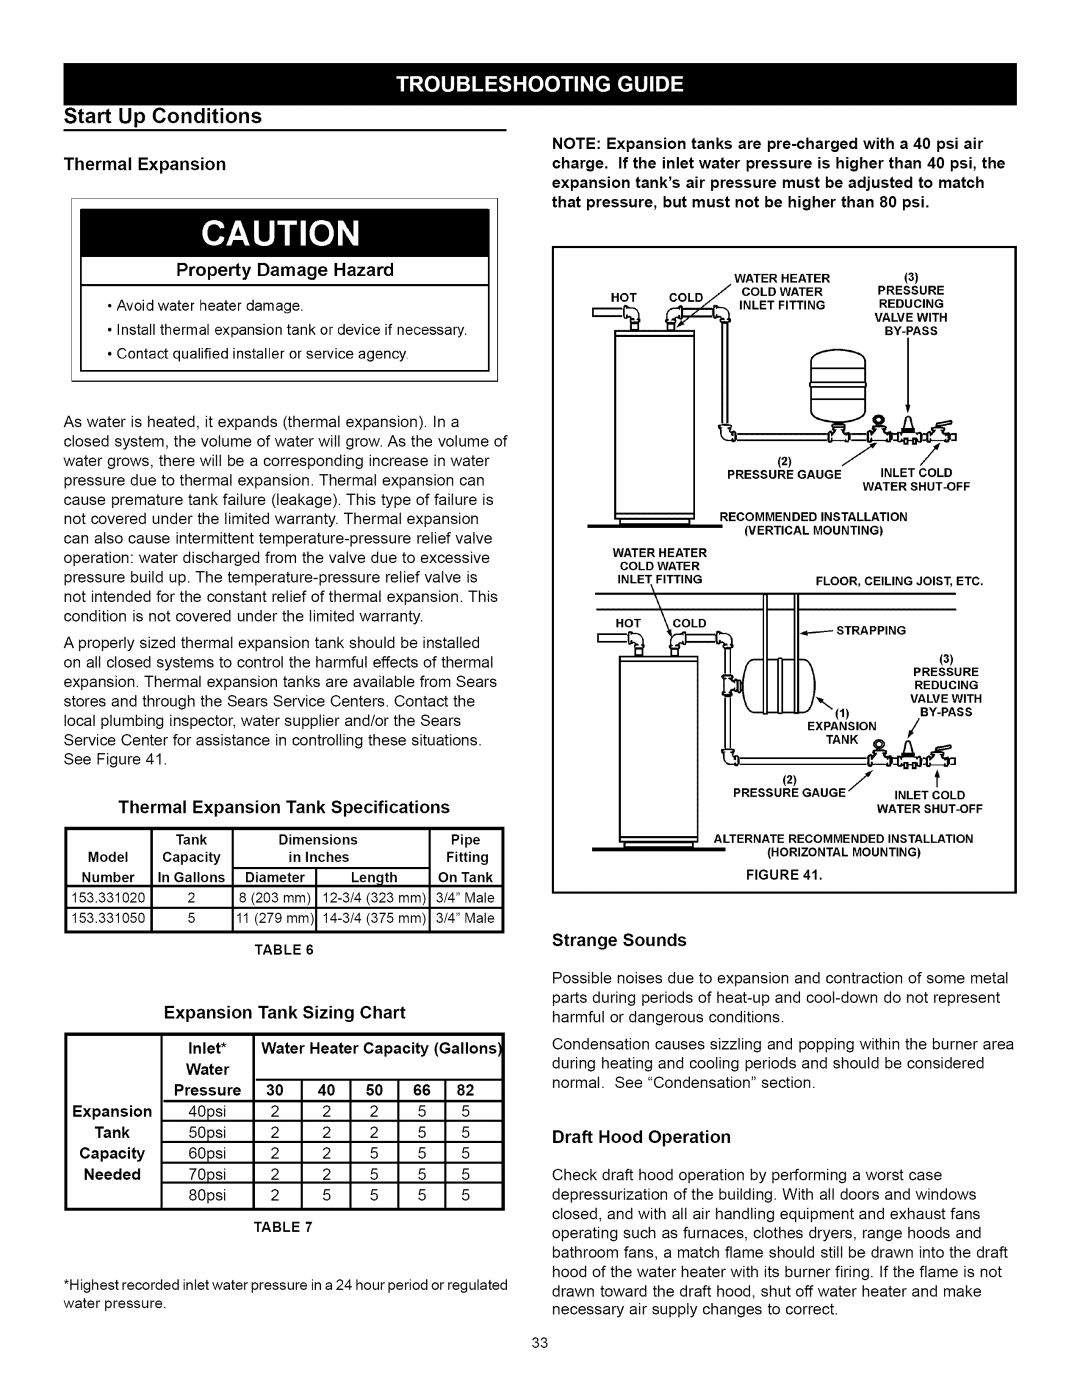 Kenmore 153.33262 manual Start Up Conditions, Property Damage Hazard, Thermal Expansion Tank Specifications, Tank Sizing 